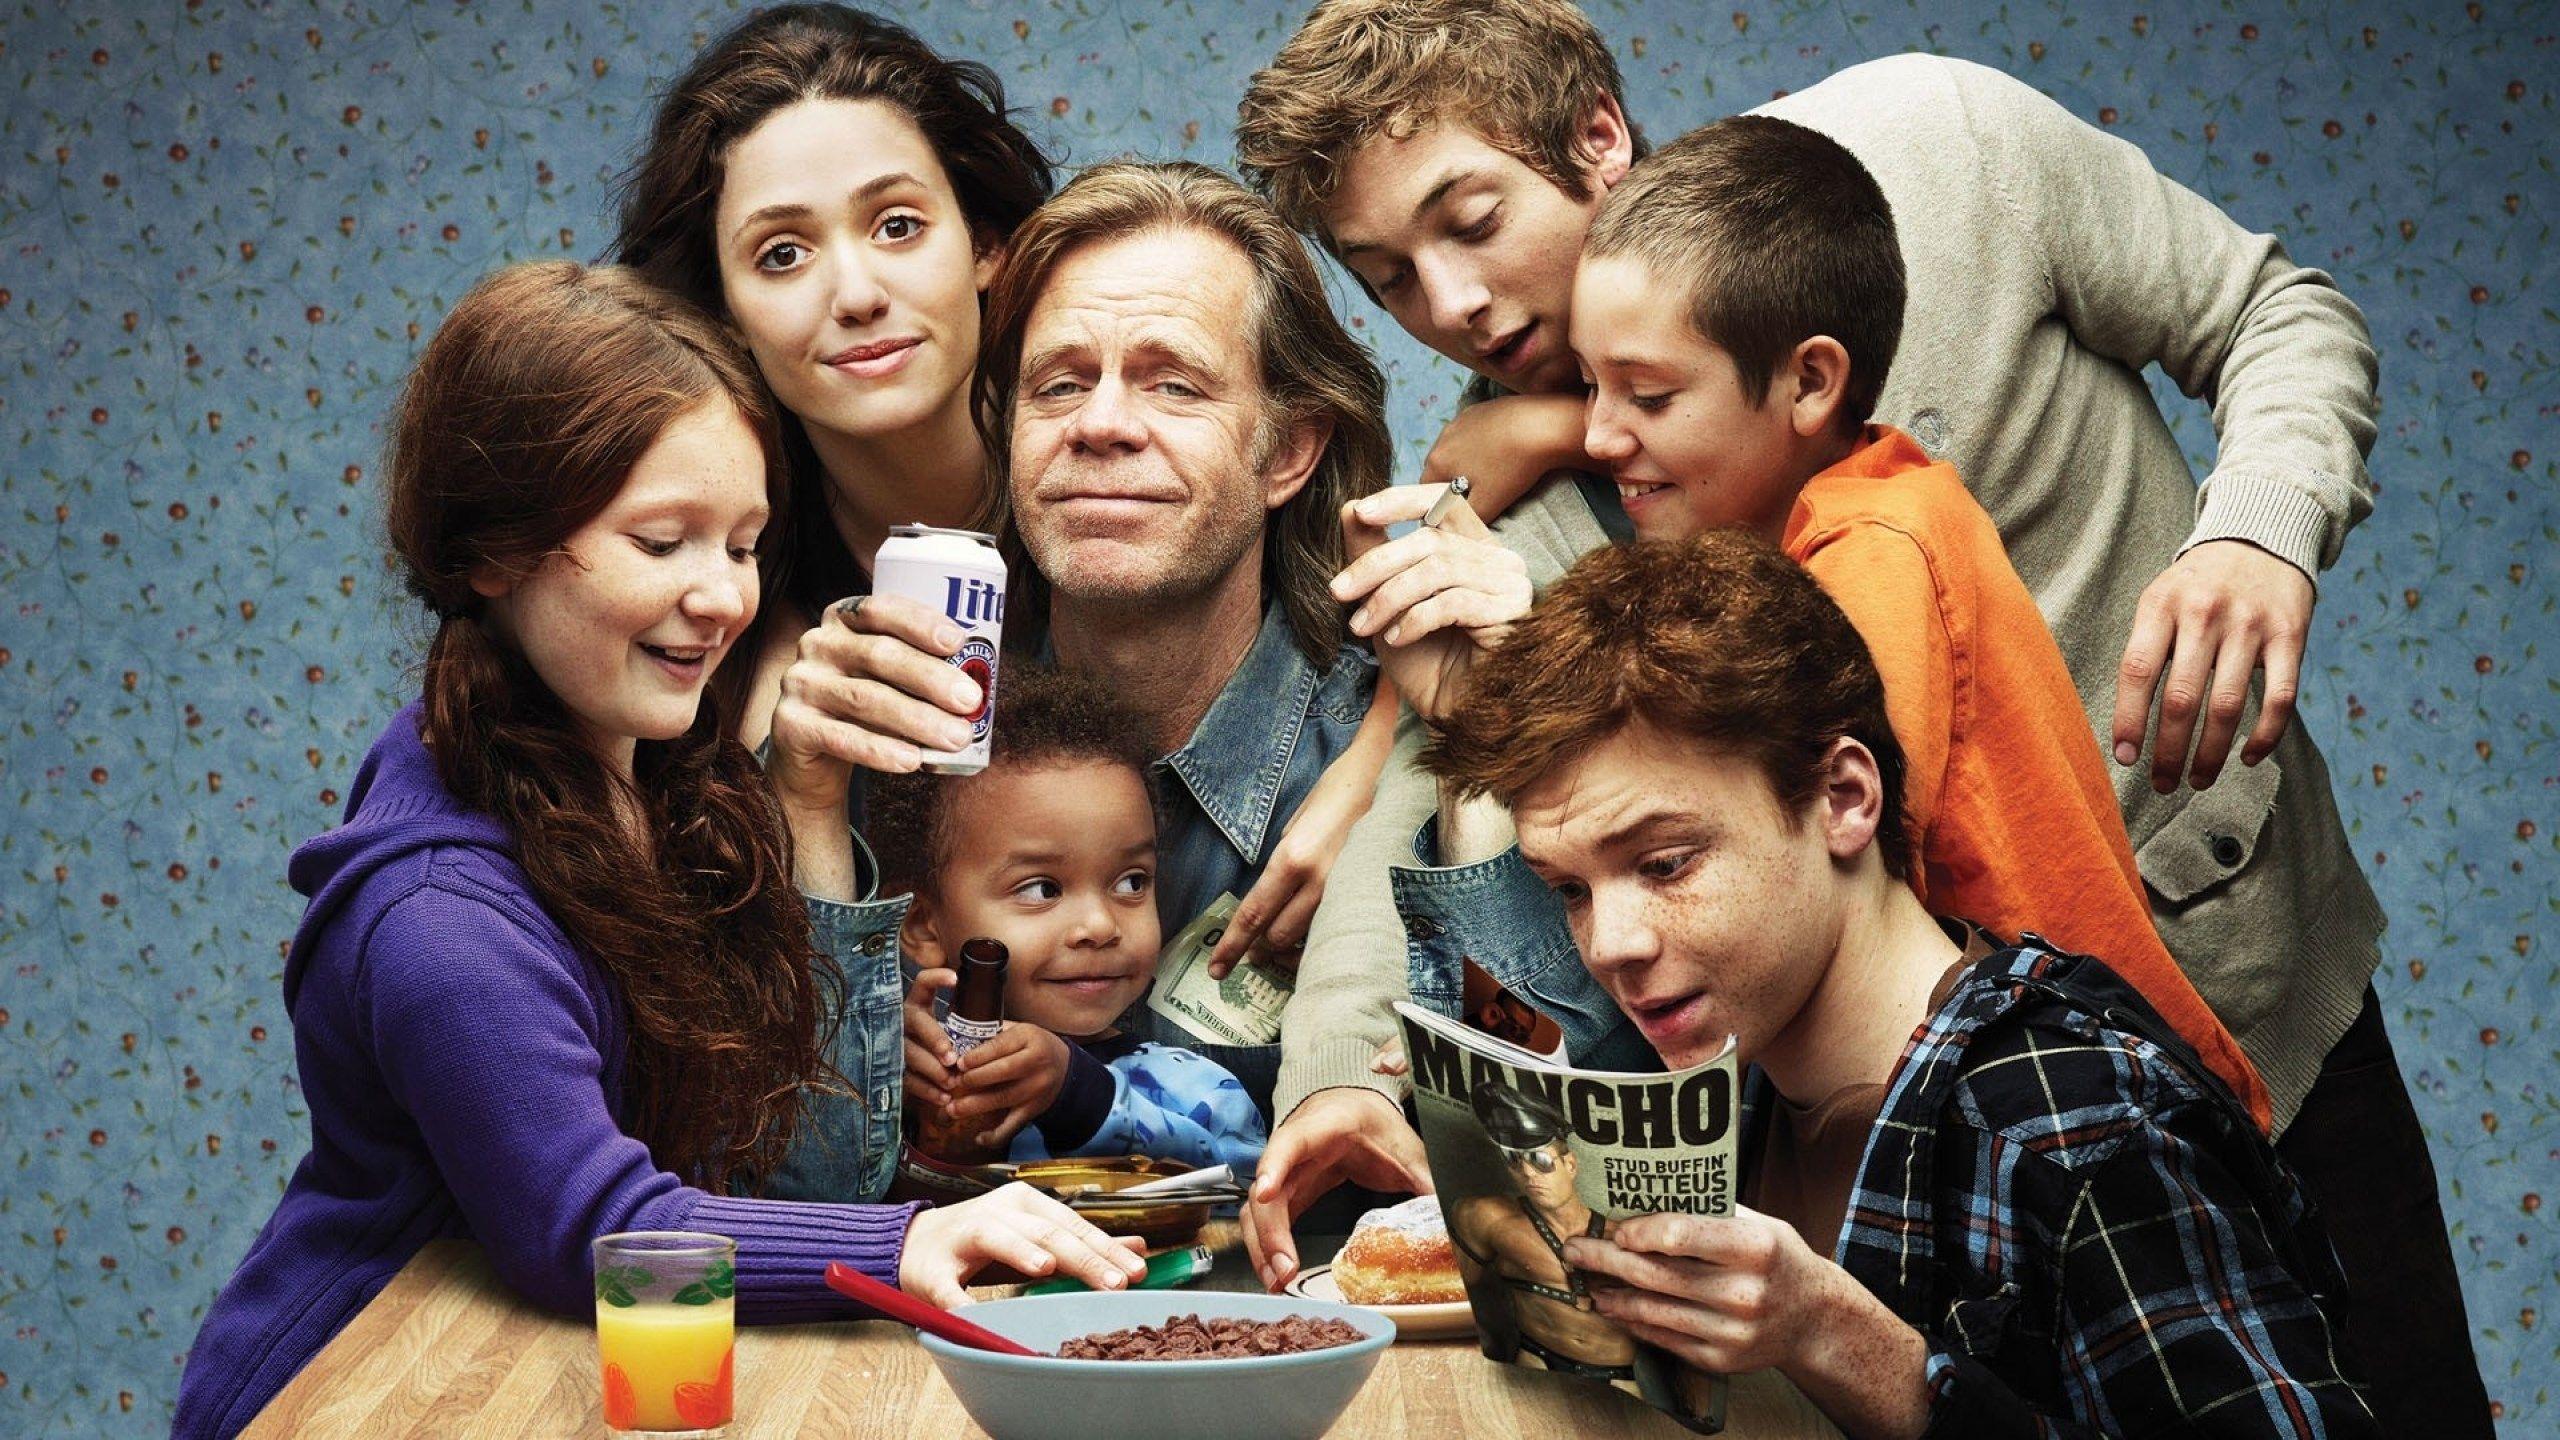 HD Widescreen shameless us Download Awesome collection